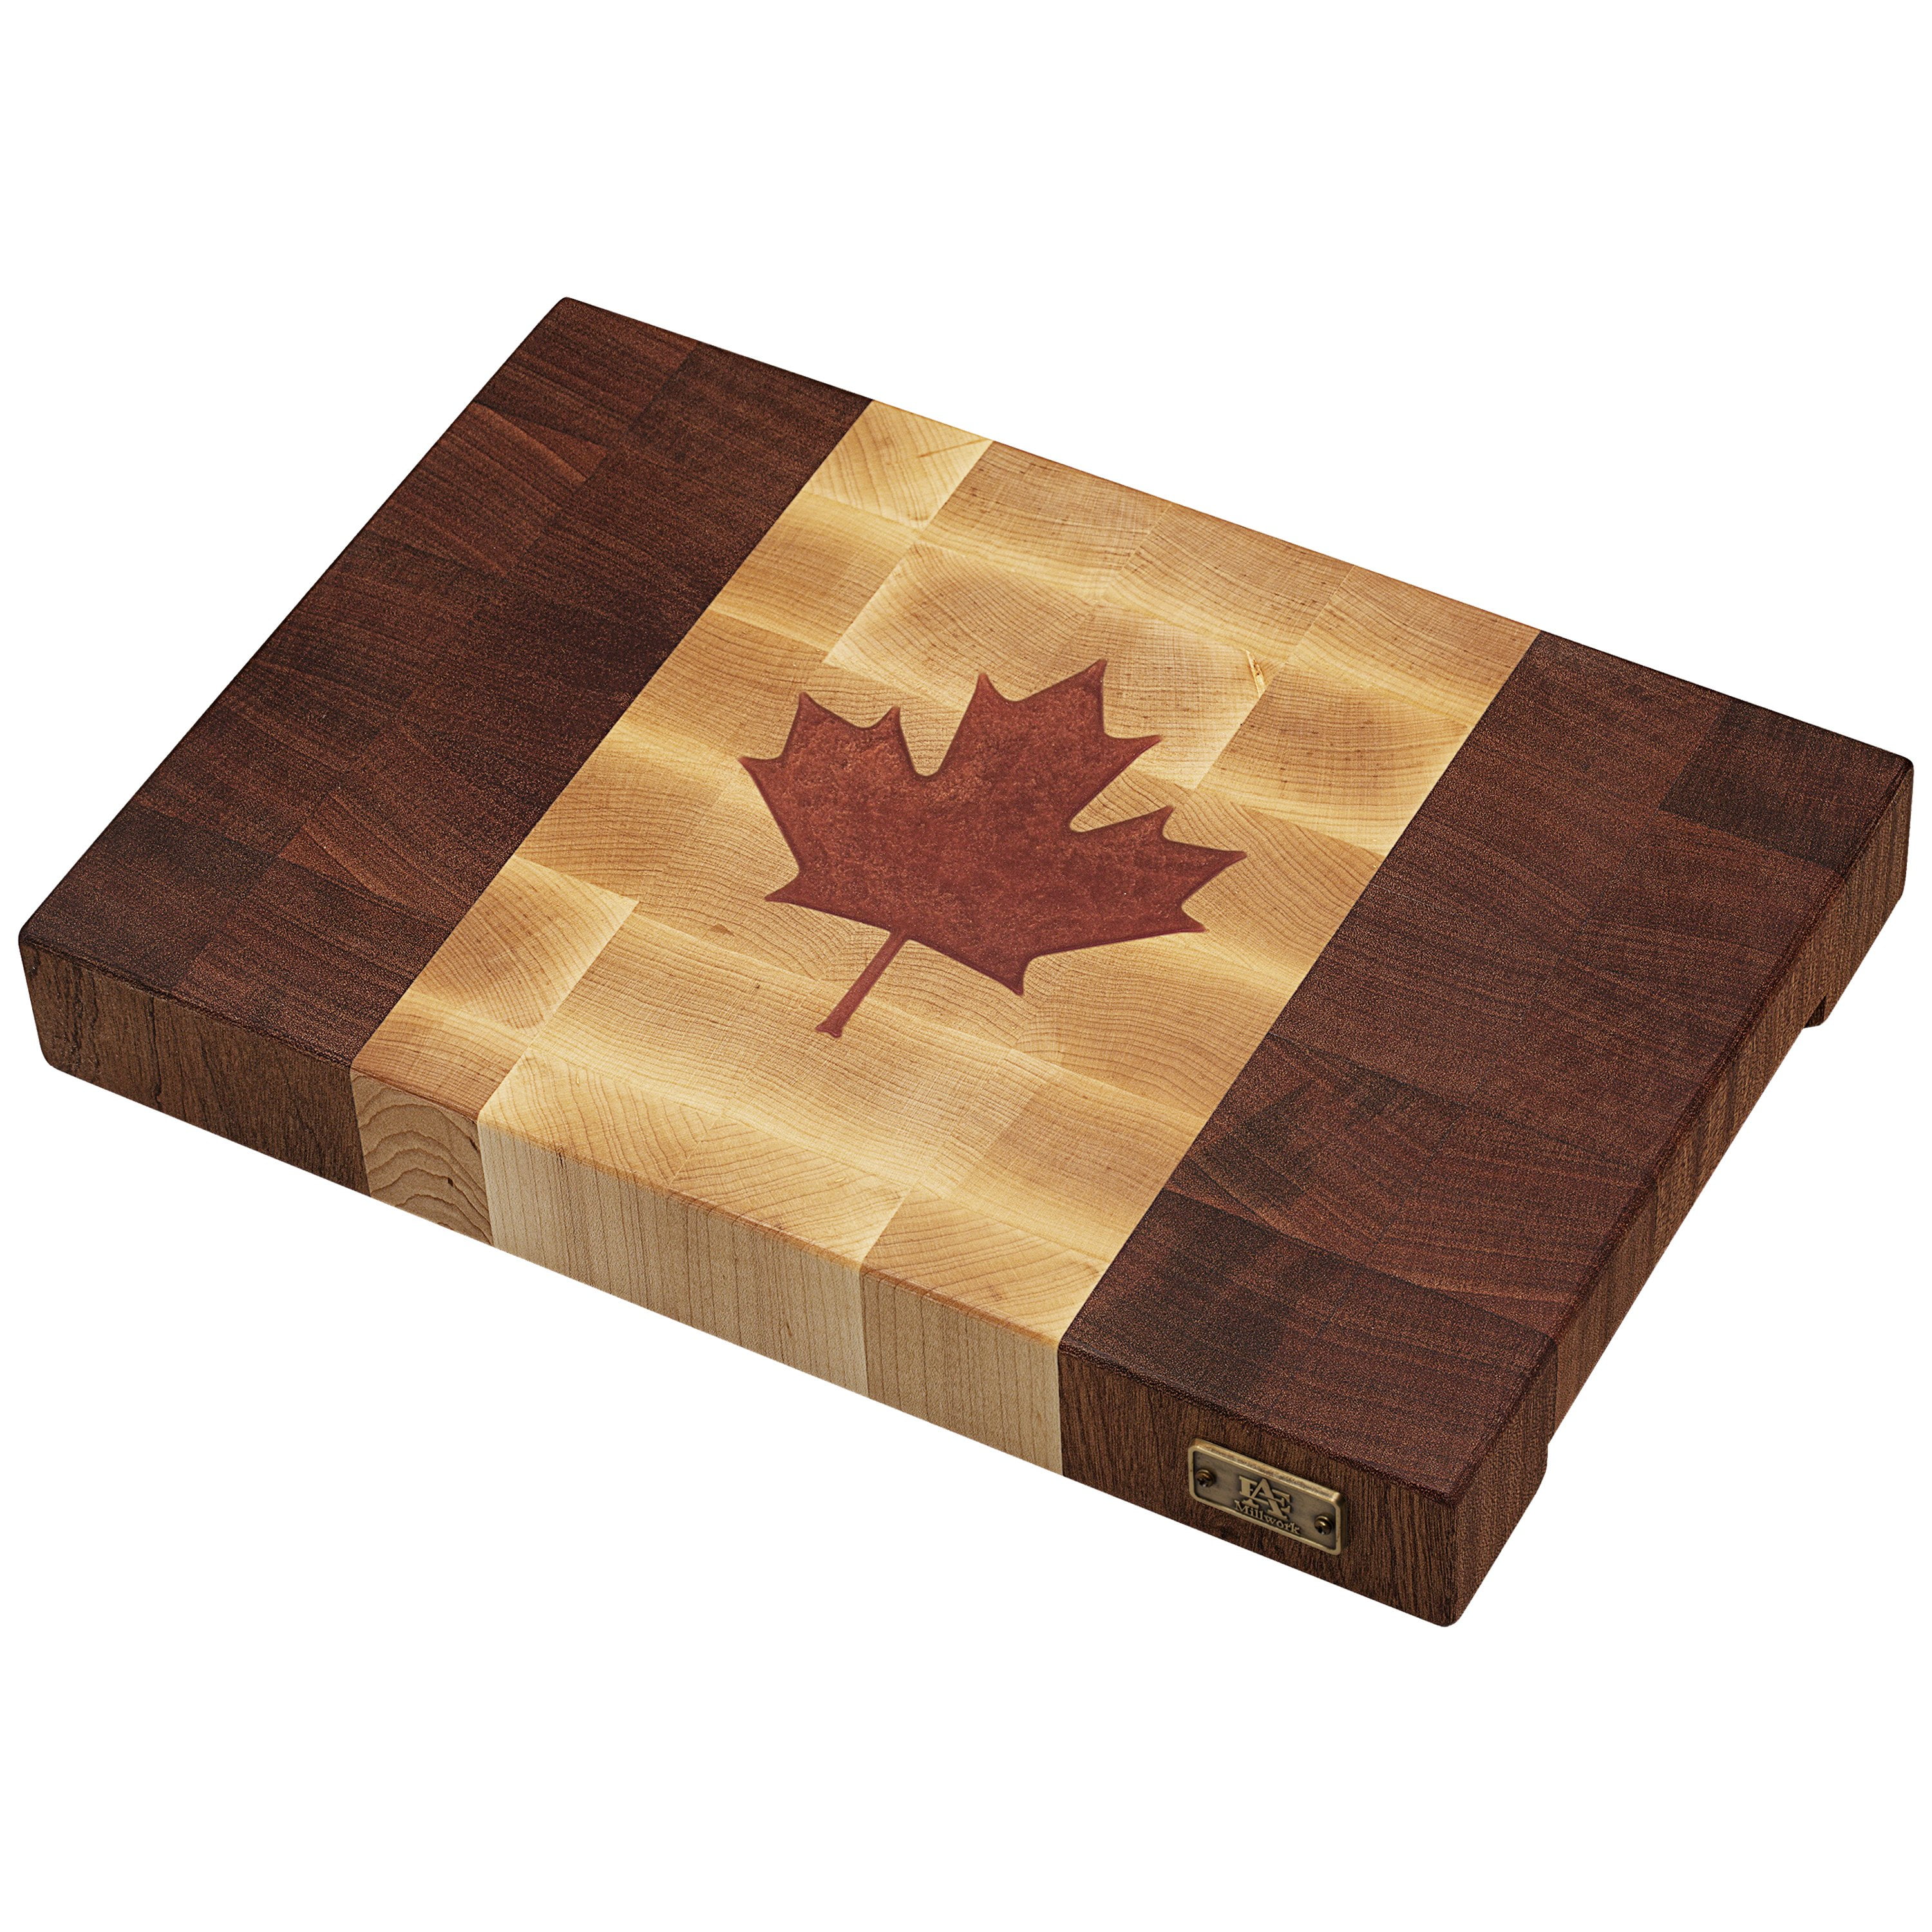 Maple Leaf Engraved Walnut Cutting Board without Handles